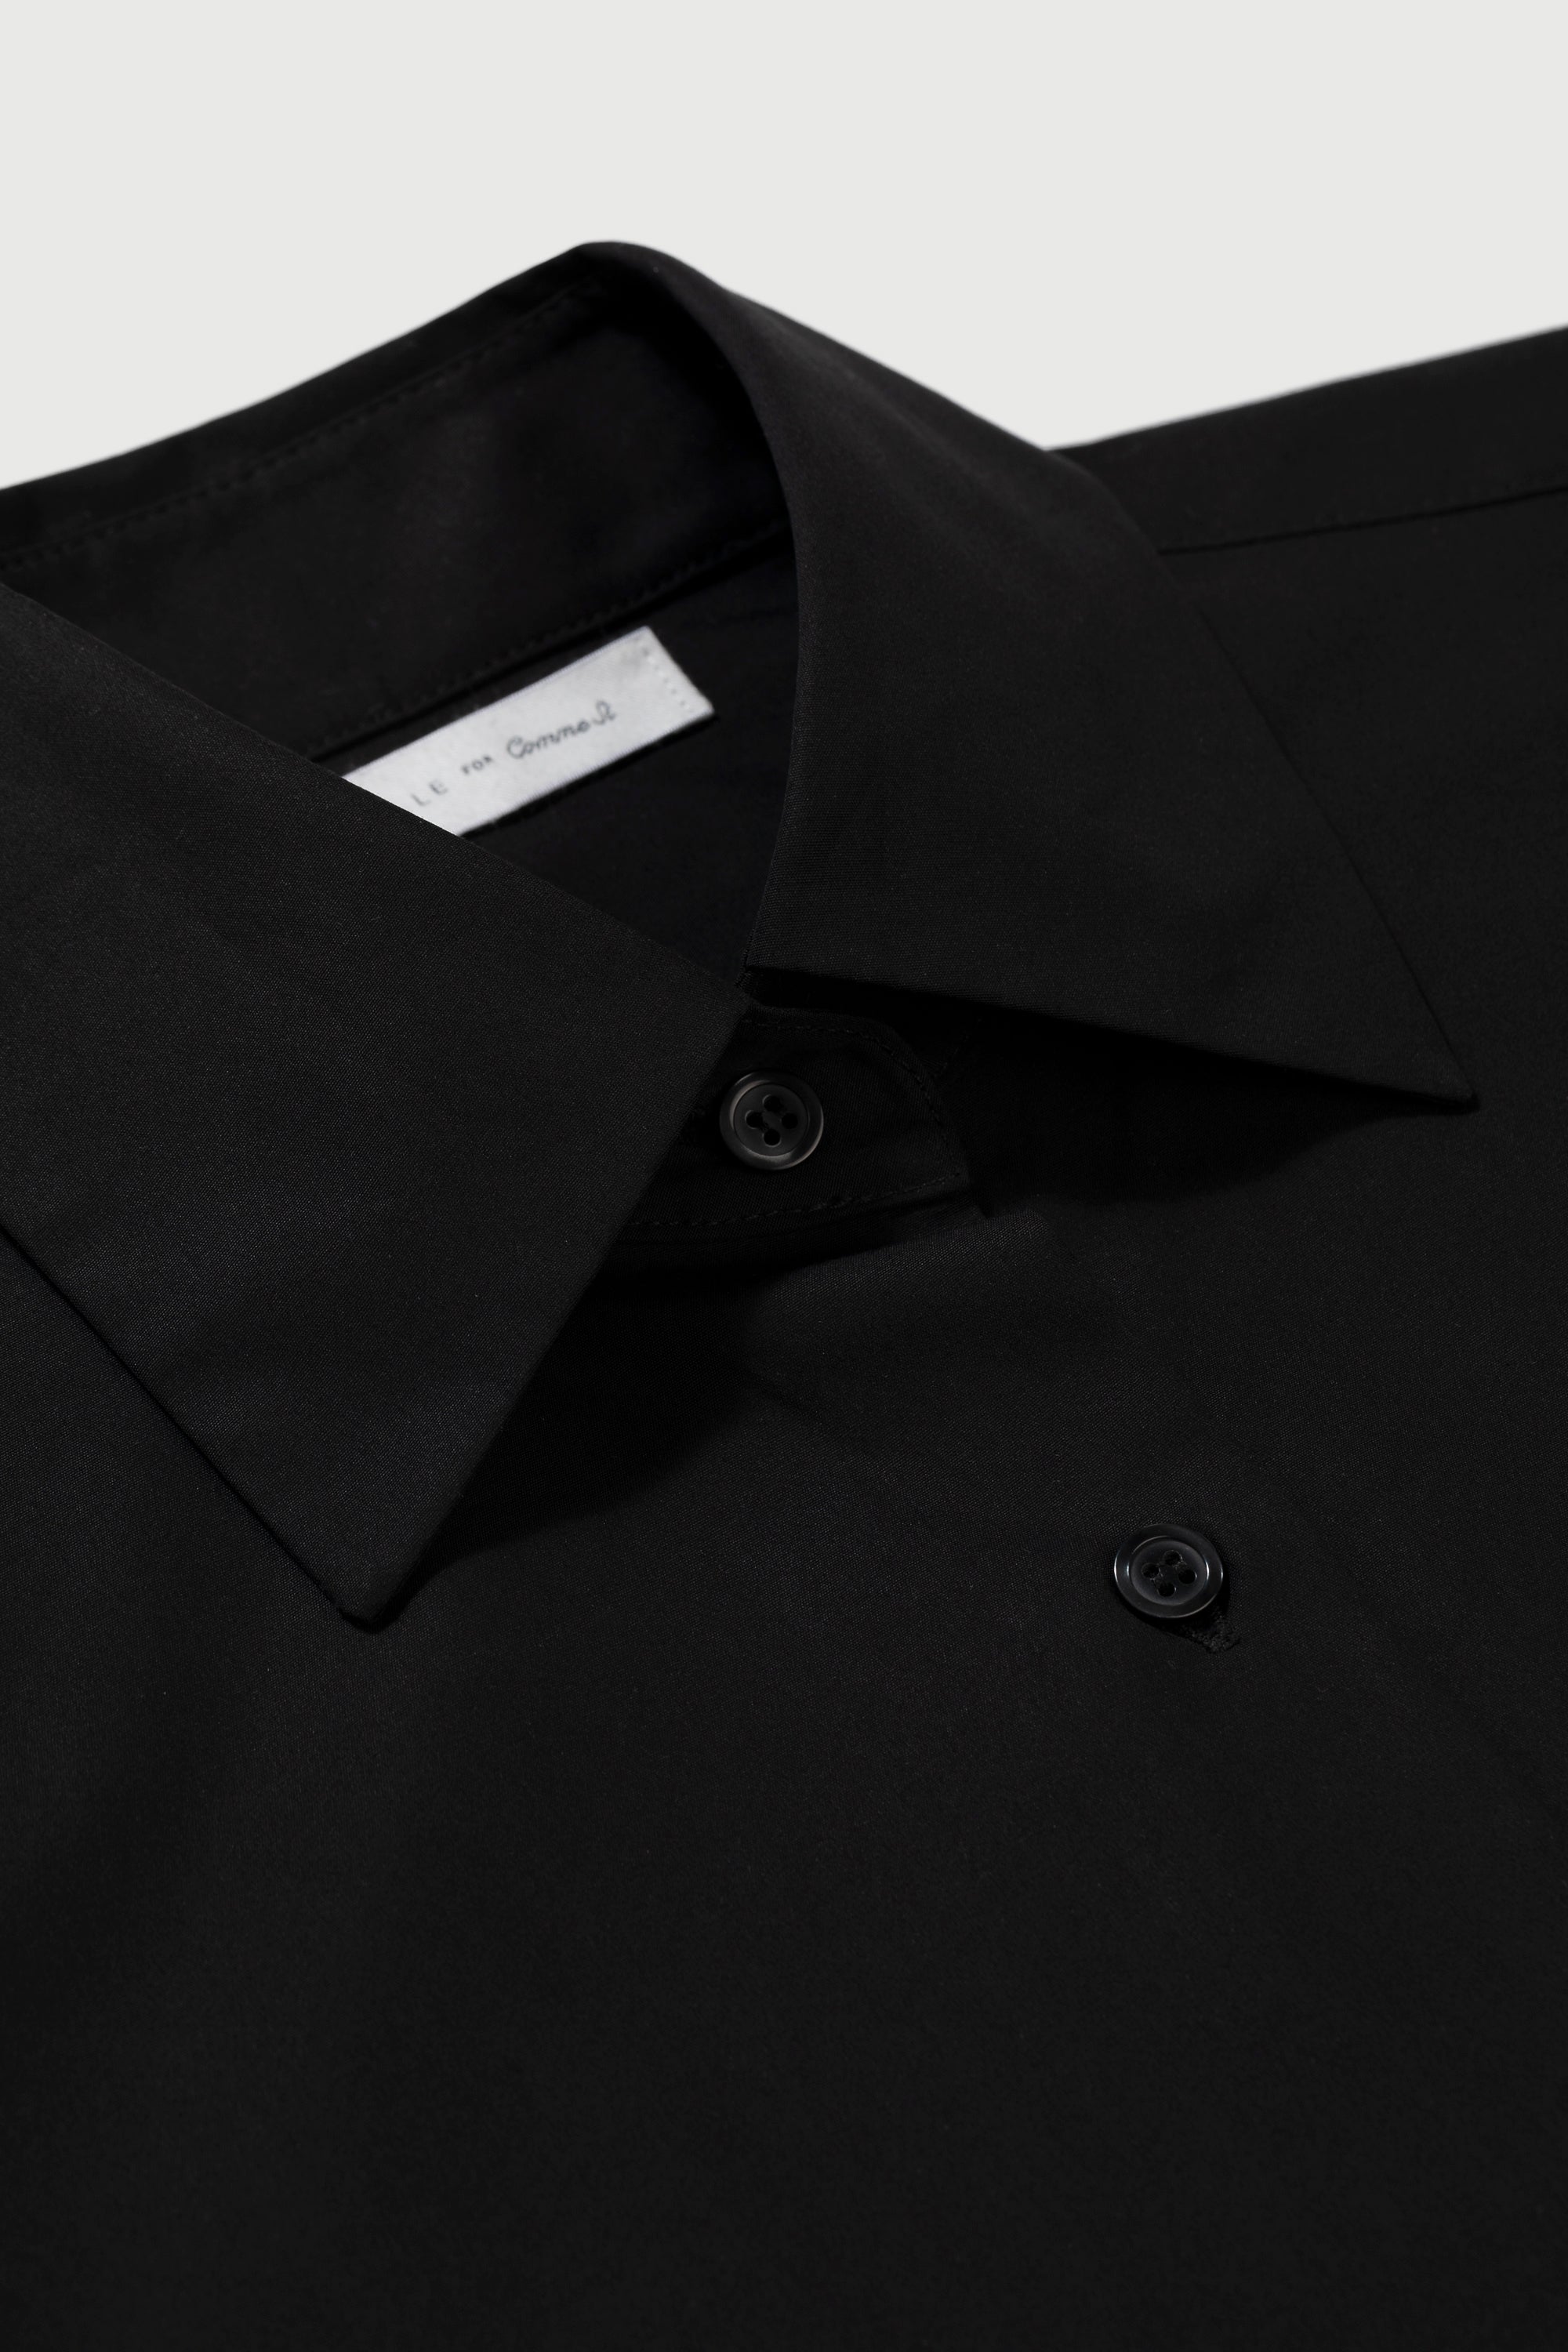 Collar Detail - The Studio Shirt in Black - Danielle for Comme Si